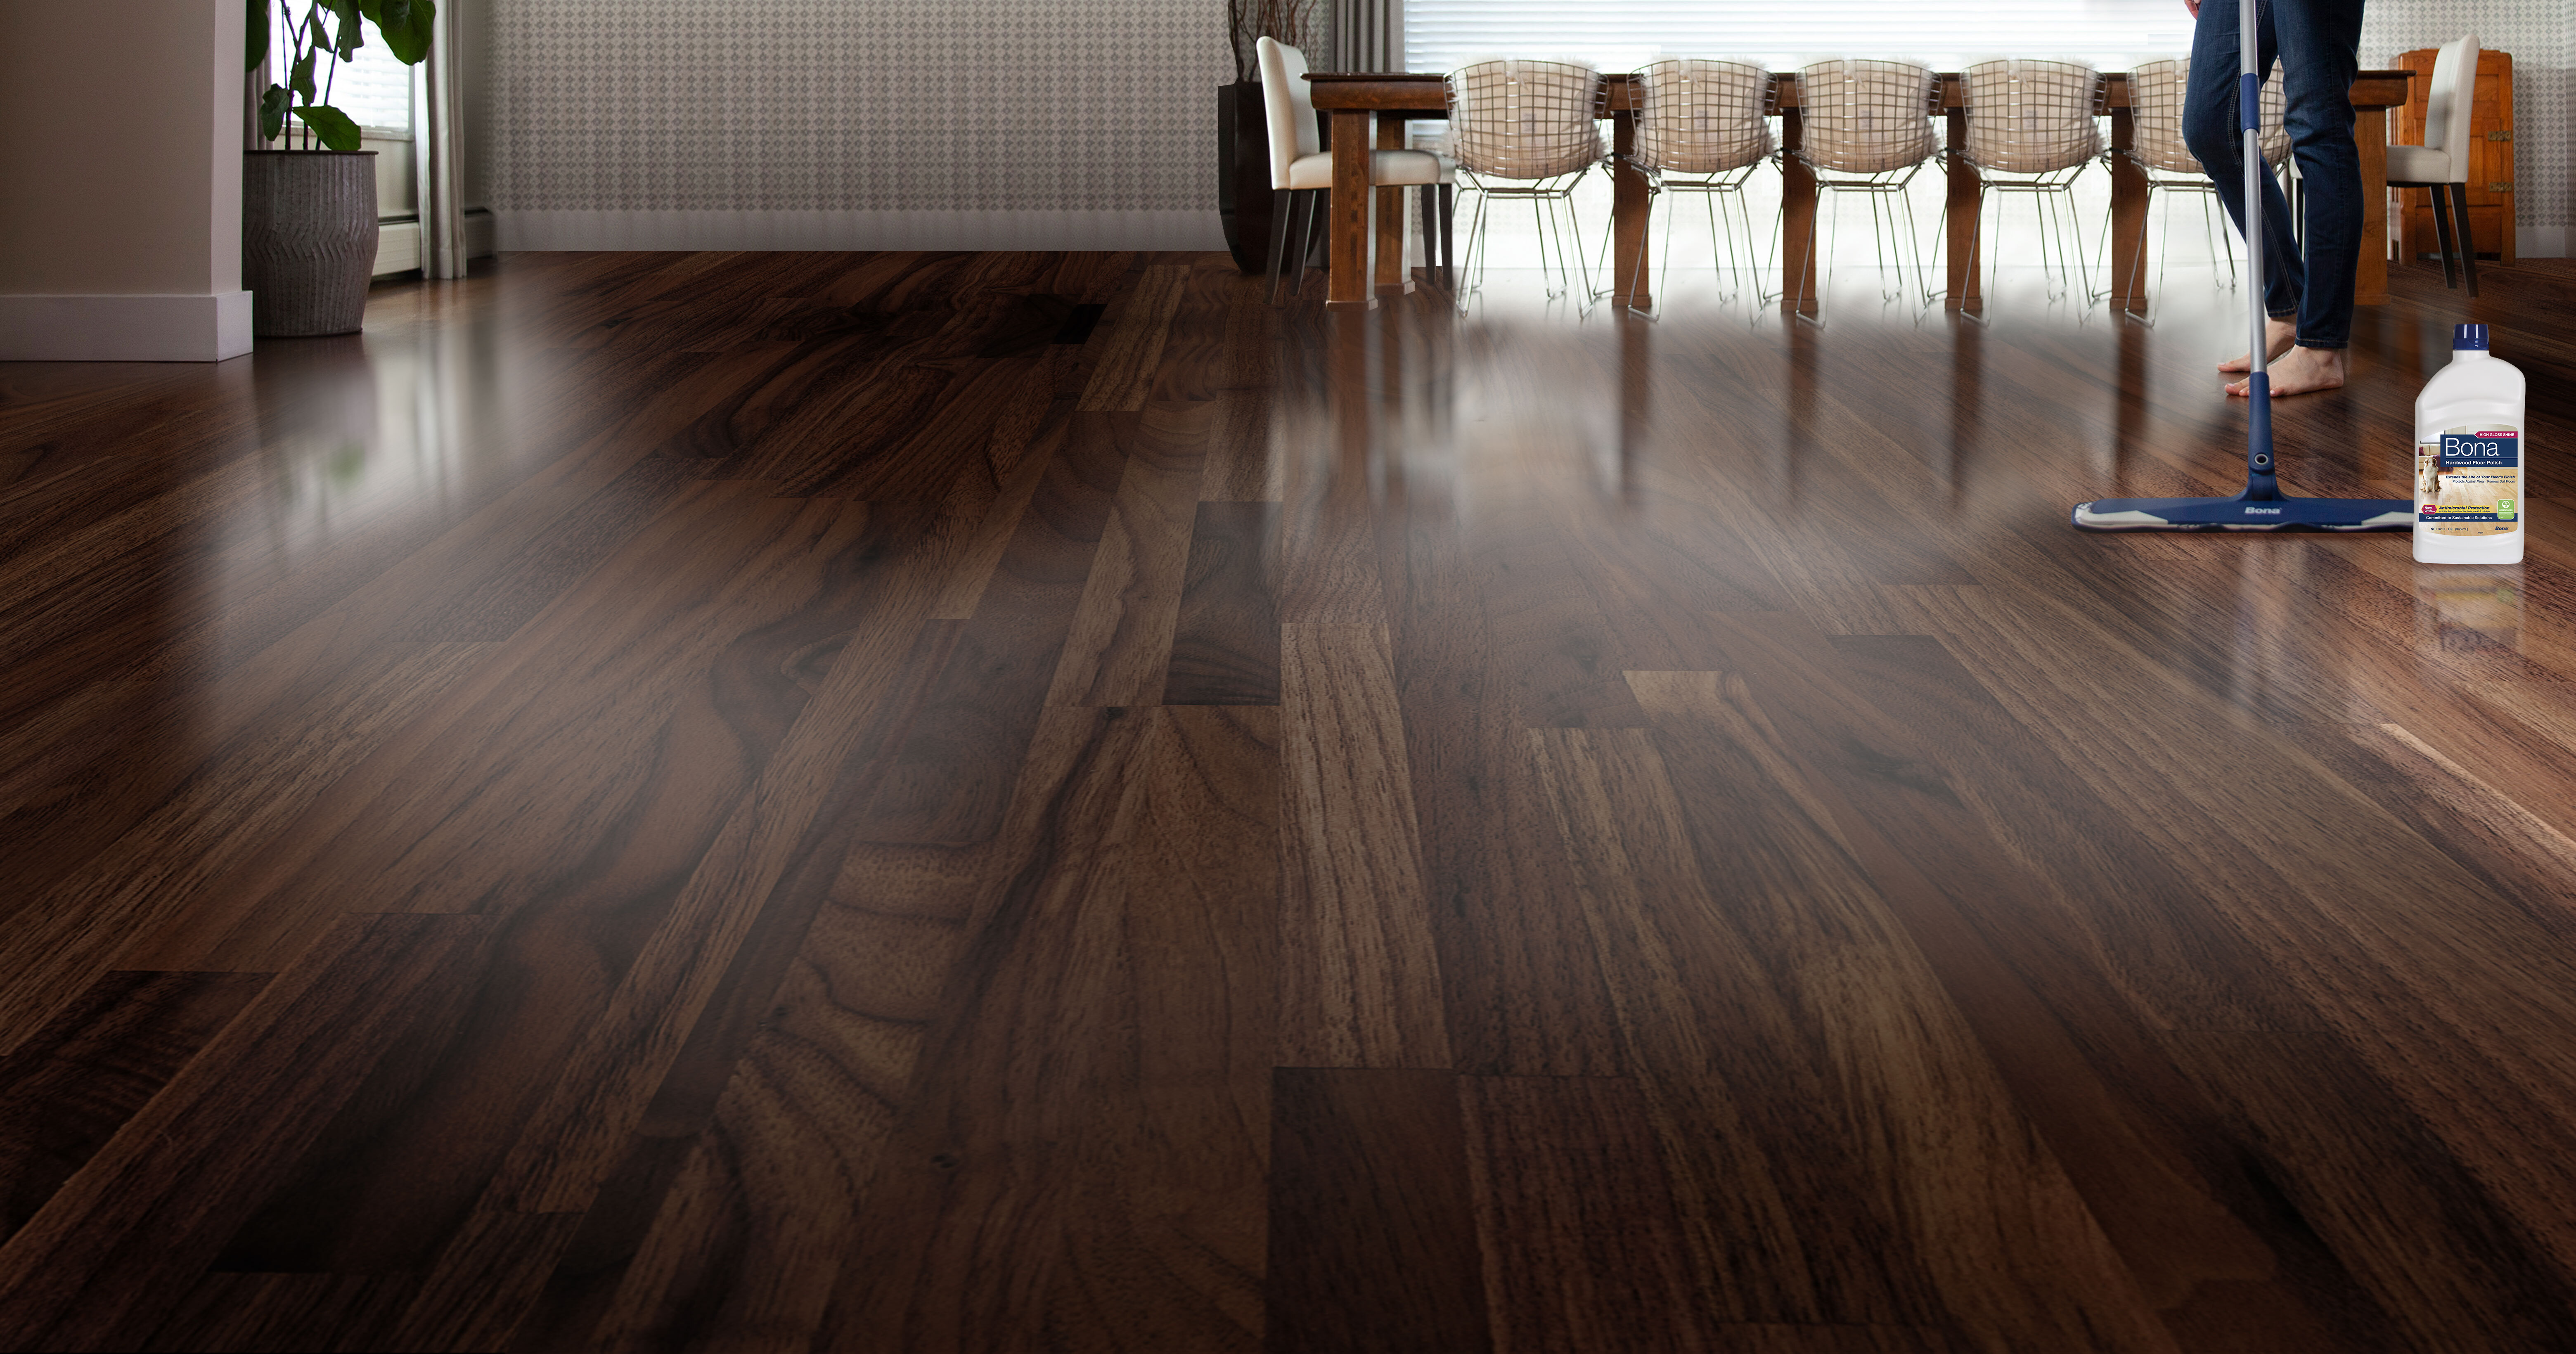 How To Polish Hardwood Floors Do S And, How To Measure Square Footage For Hardwood Flooring